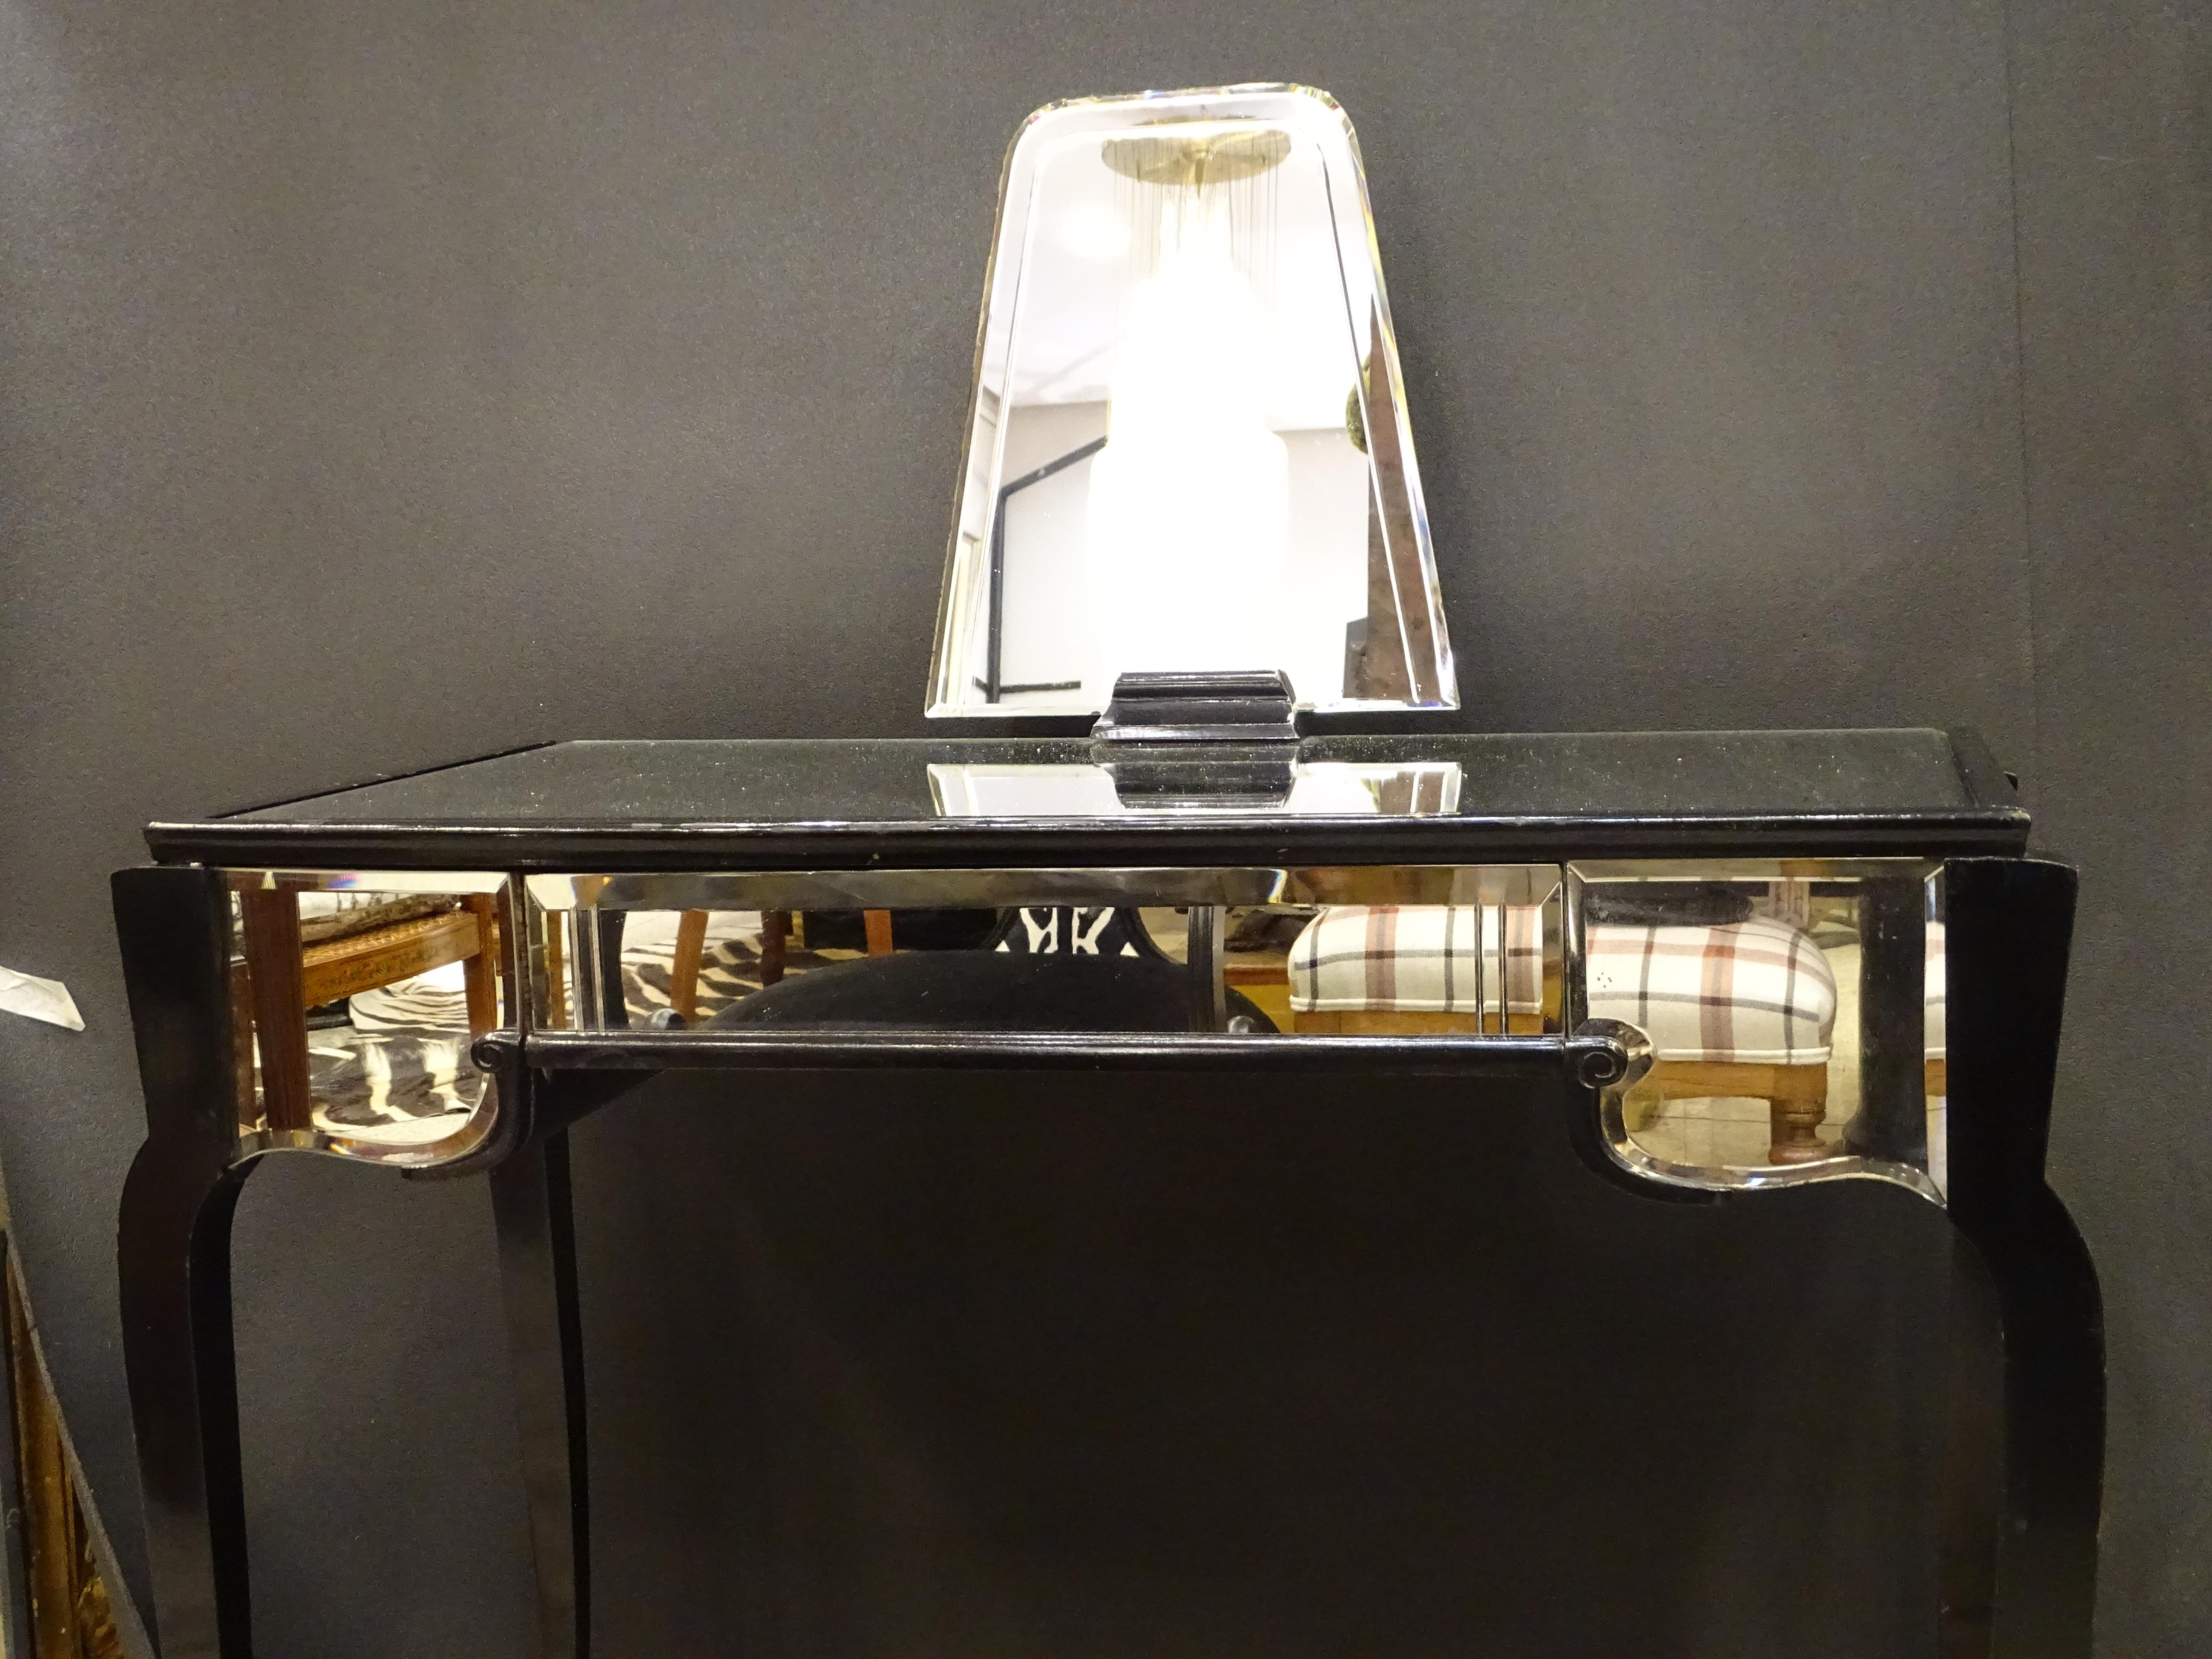 Outsanding Art Deco dressing table or vanity table, 30s, France.
 Original Déco design, France , private collection 
It was made in the 1930s in the context of art deco aesthetics. The piece of furniture is made up of a console-type structure with